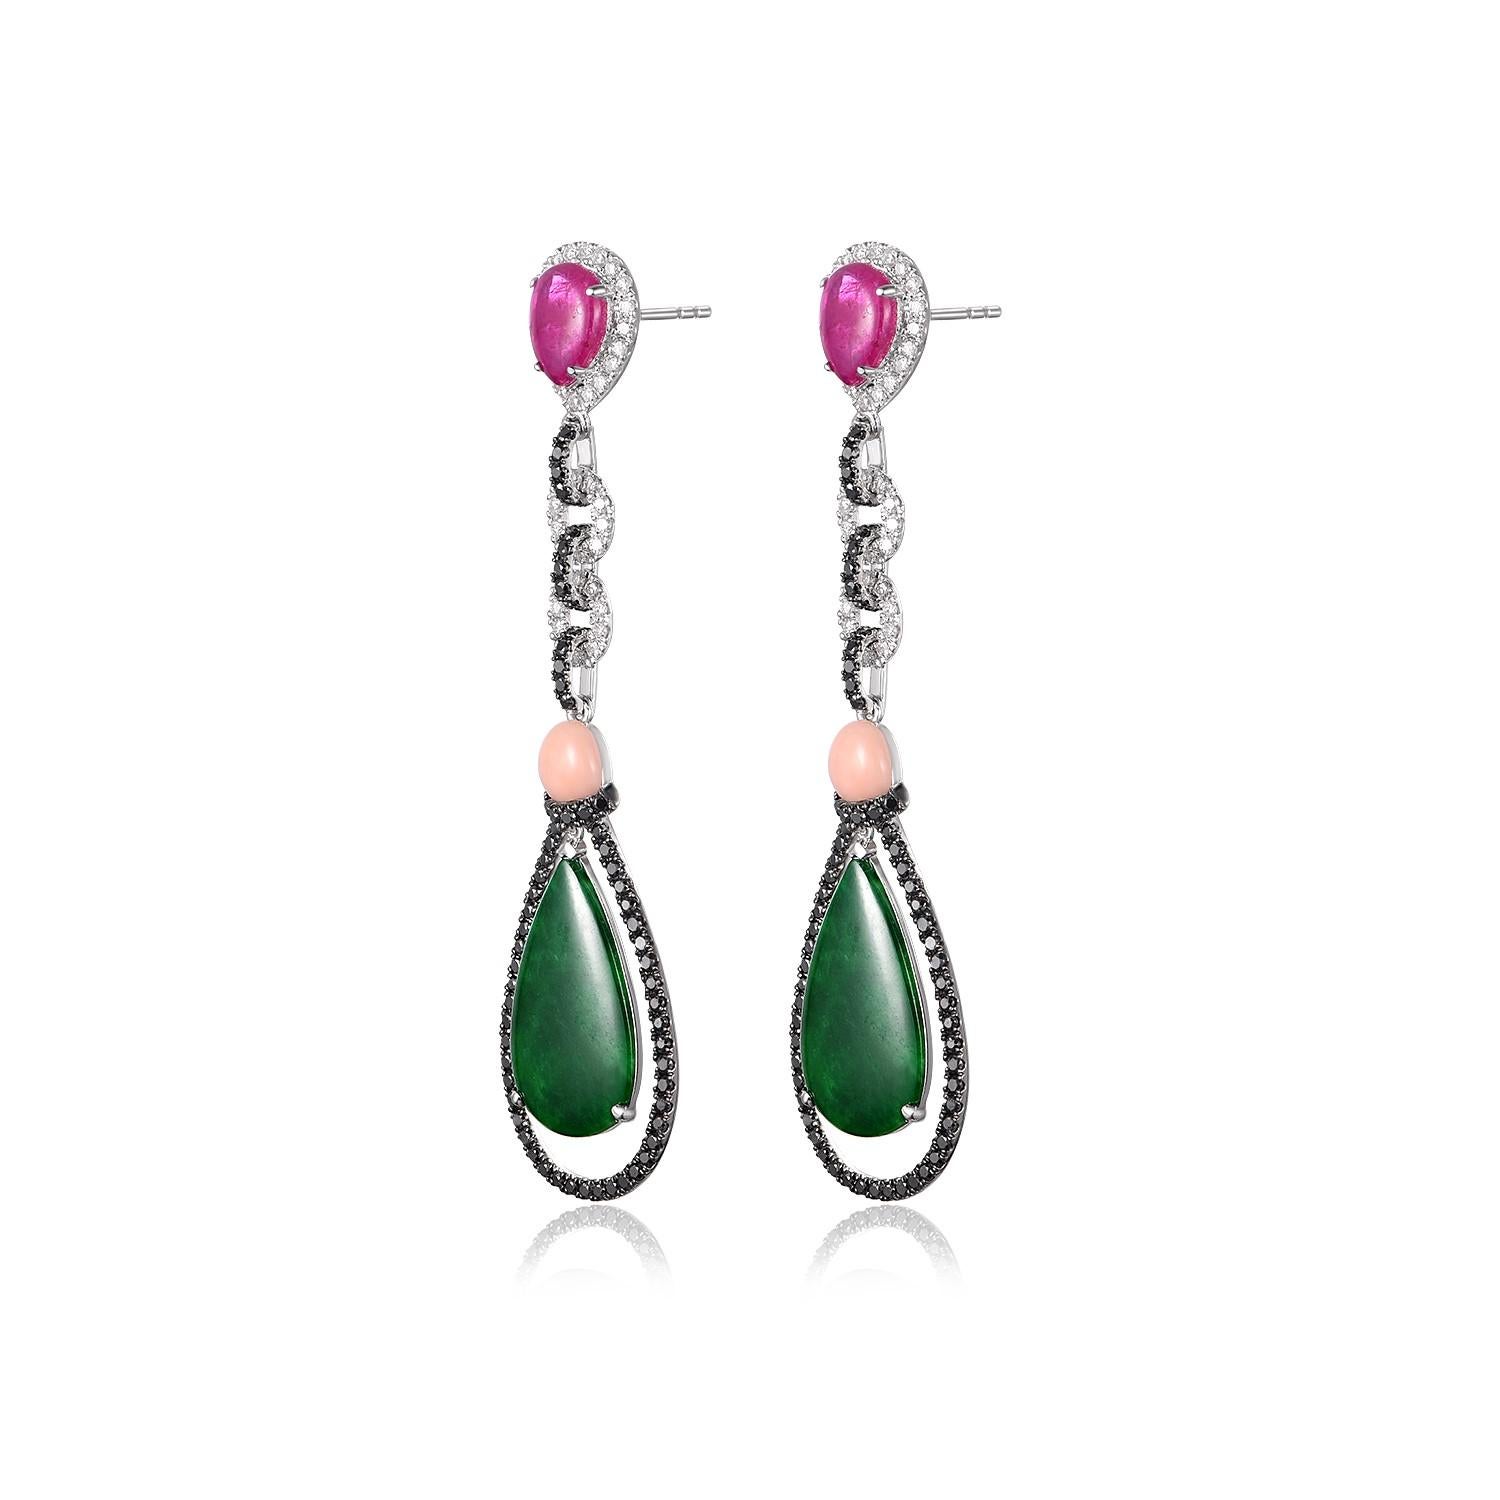 These exquisite vintage drop earrings are a testament to fine craftsmanship and timeless elegance. Crafted in gleaming silver and 18k white gold, they effortlessly combine luxury and sophistication.

At the pinnacle of each earring, a radiant ruby